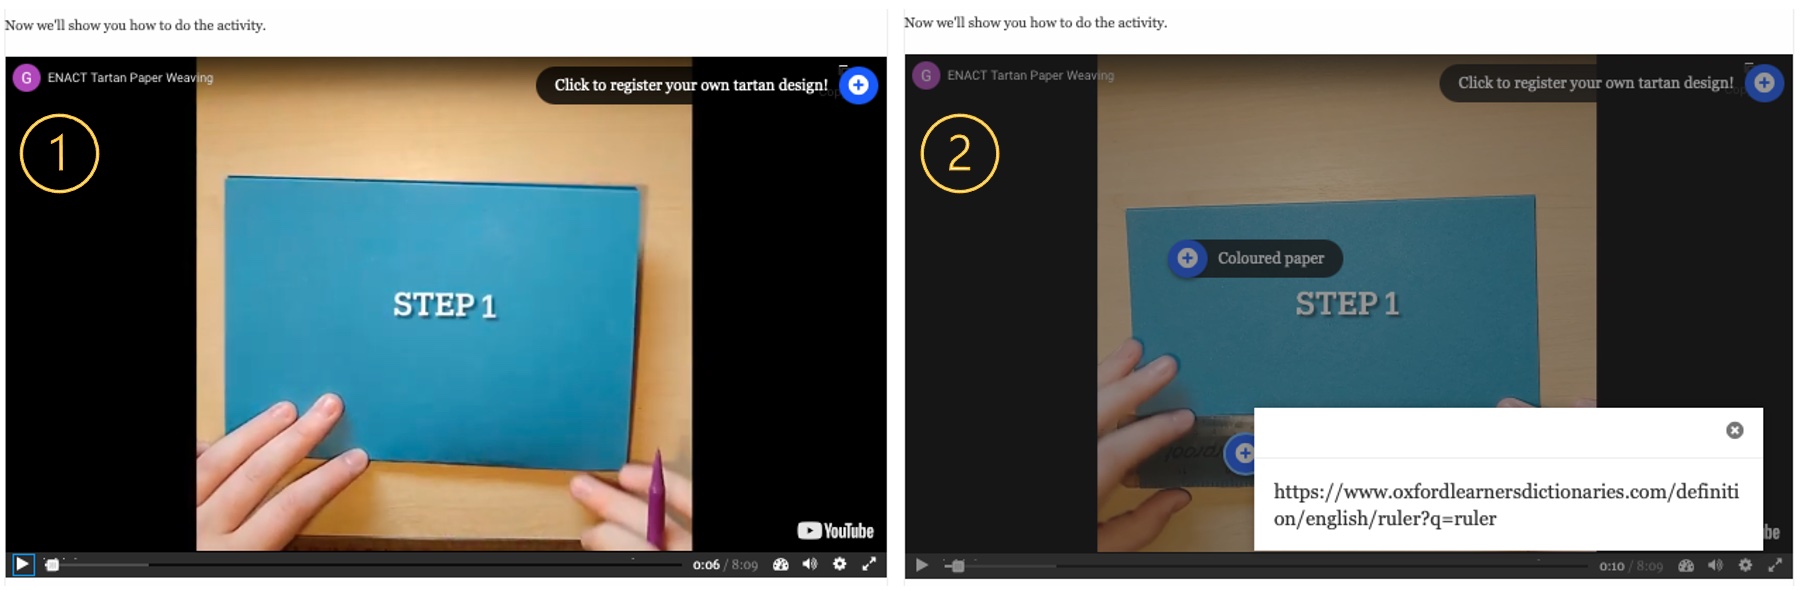 Picture 4 - During-task activities of the ENACT web app. (1. Interactive video showing how to do the activity; 2. Example interactivity, which includes additional information or questions.)